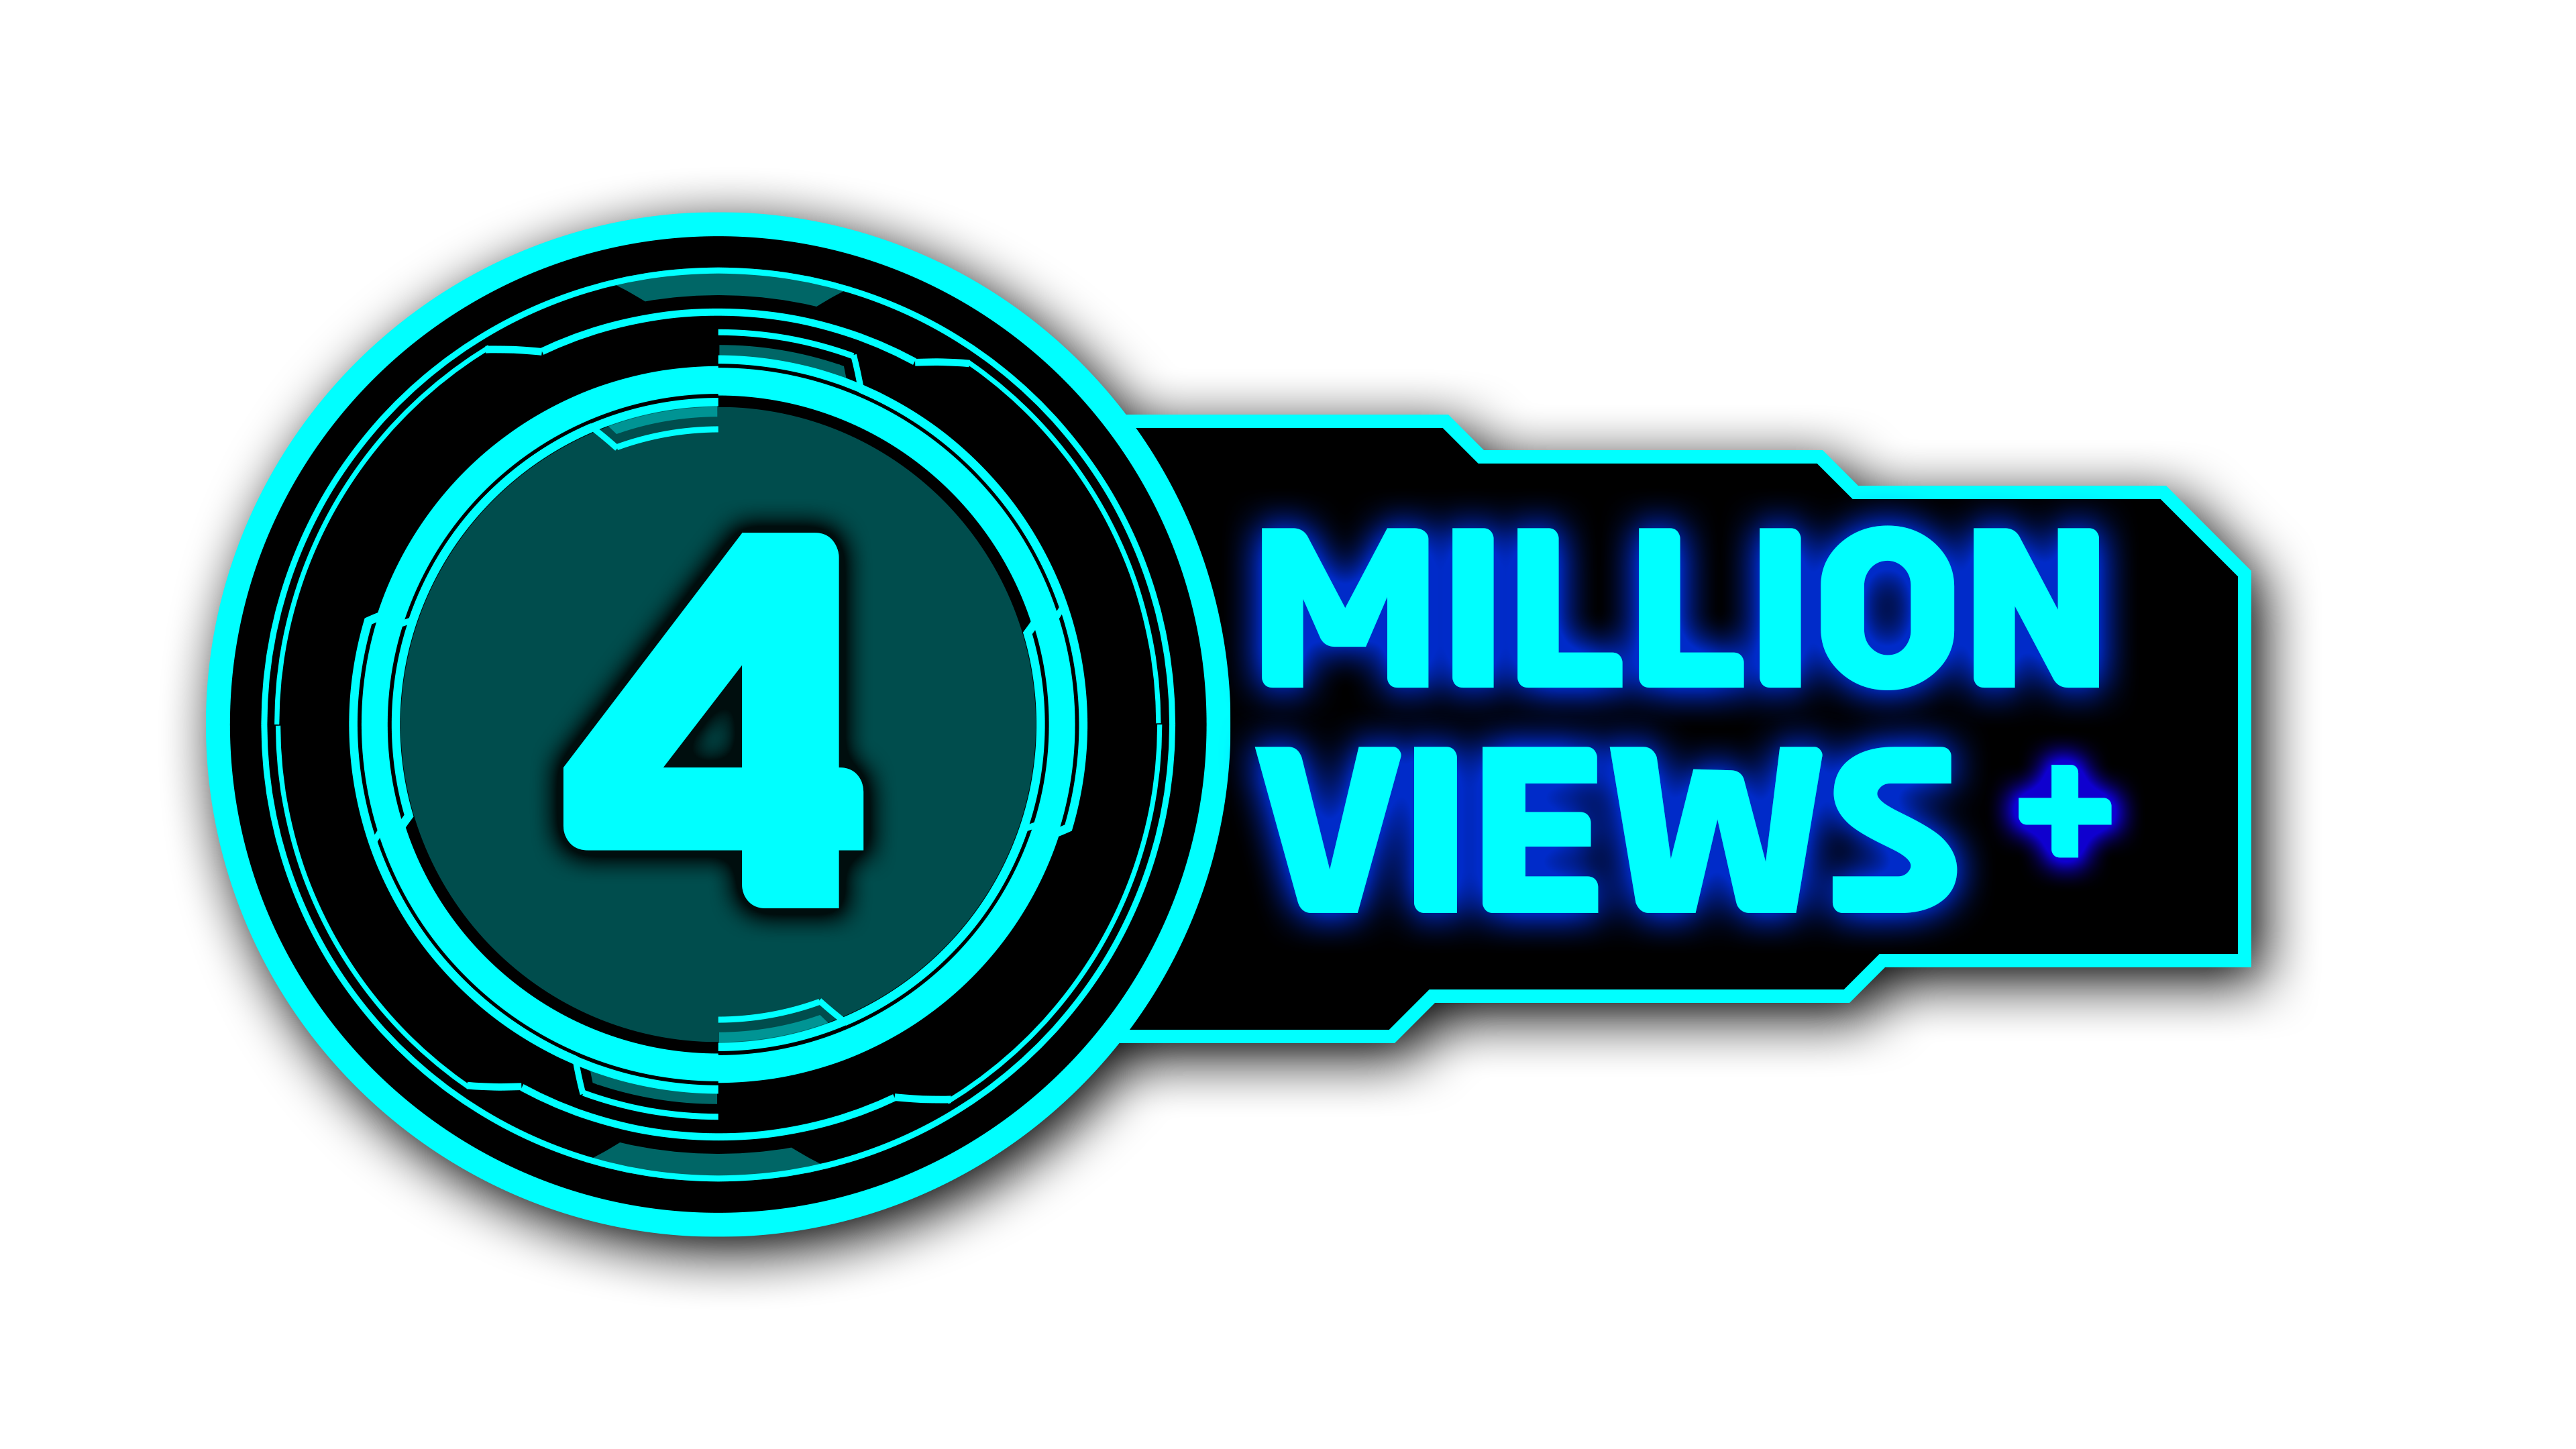 4 Million View PNG Downloads Stunning circle Graphics with Black and Cyan sci fi HUD Displays